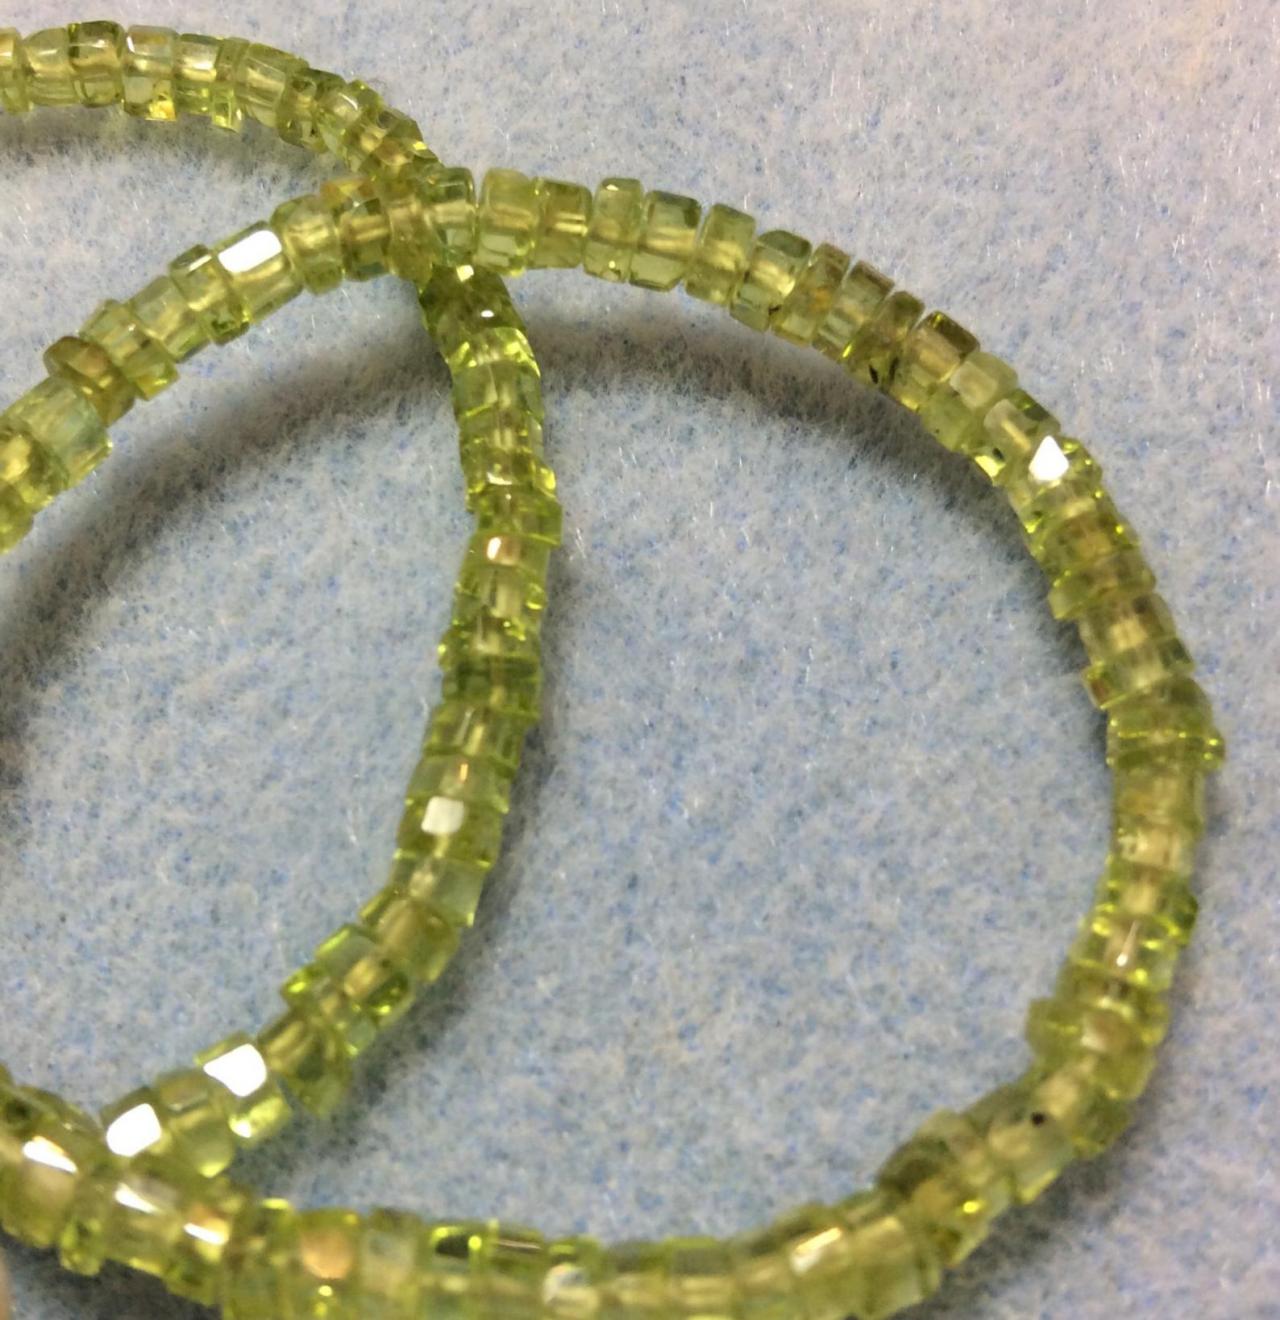 Unique Cut Peridot Heishi Rondelle Spacer Gemstone Beads 4x2mm Tubular Faceted 50 Percent Off Was 39.99